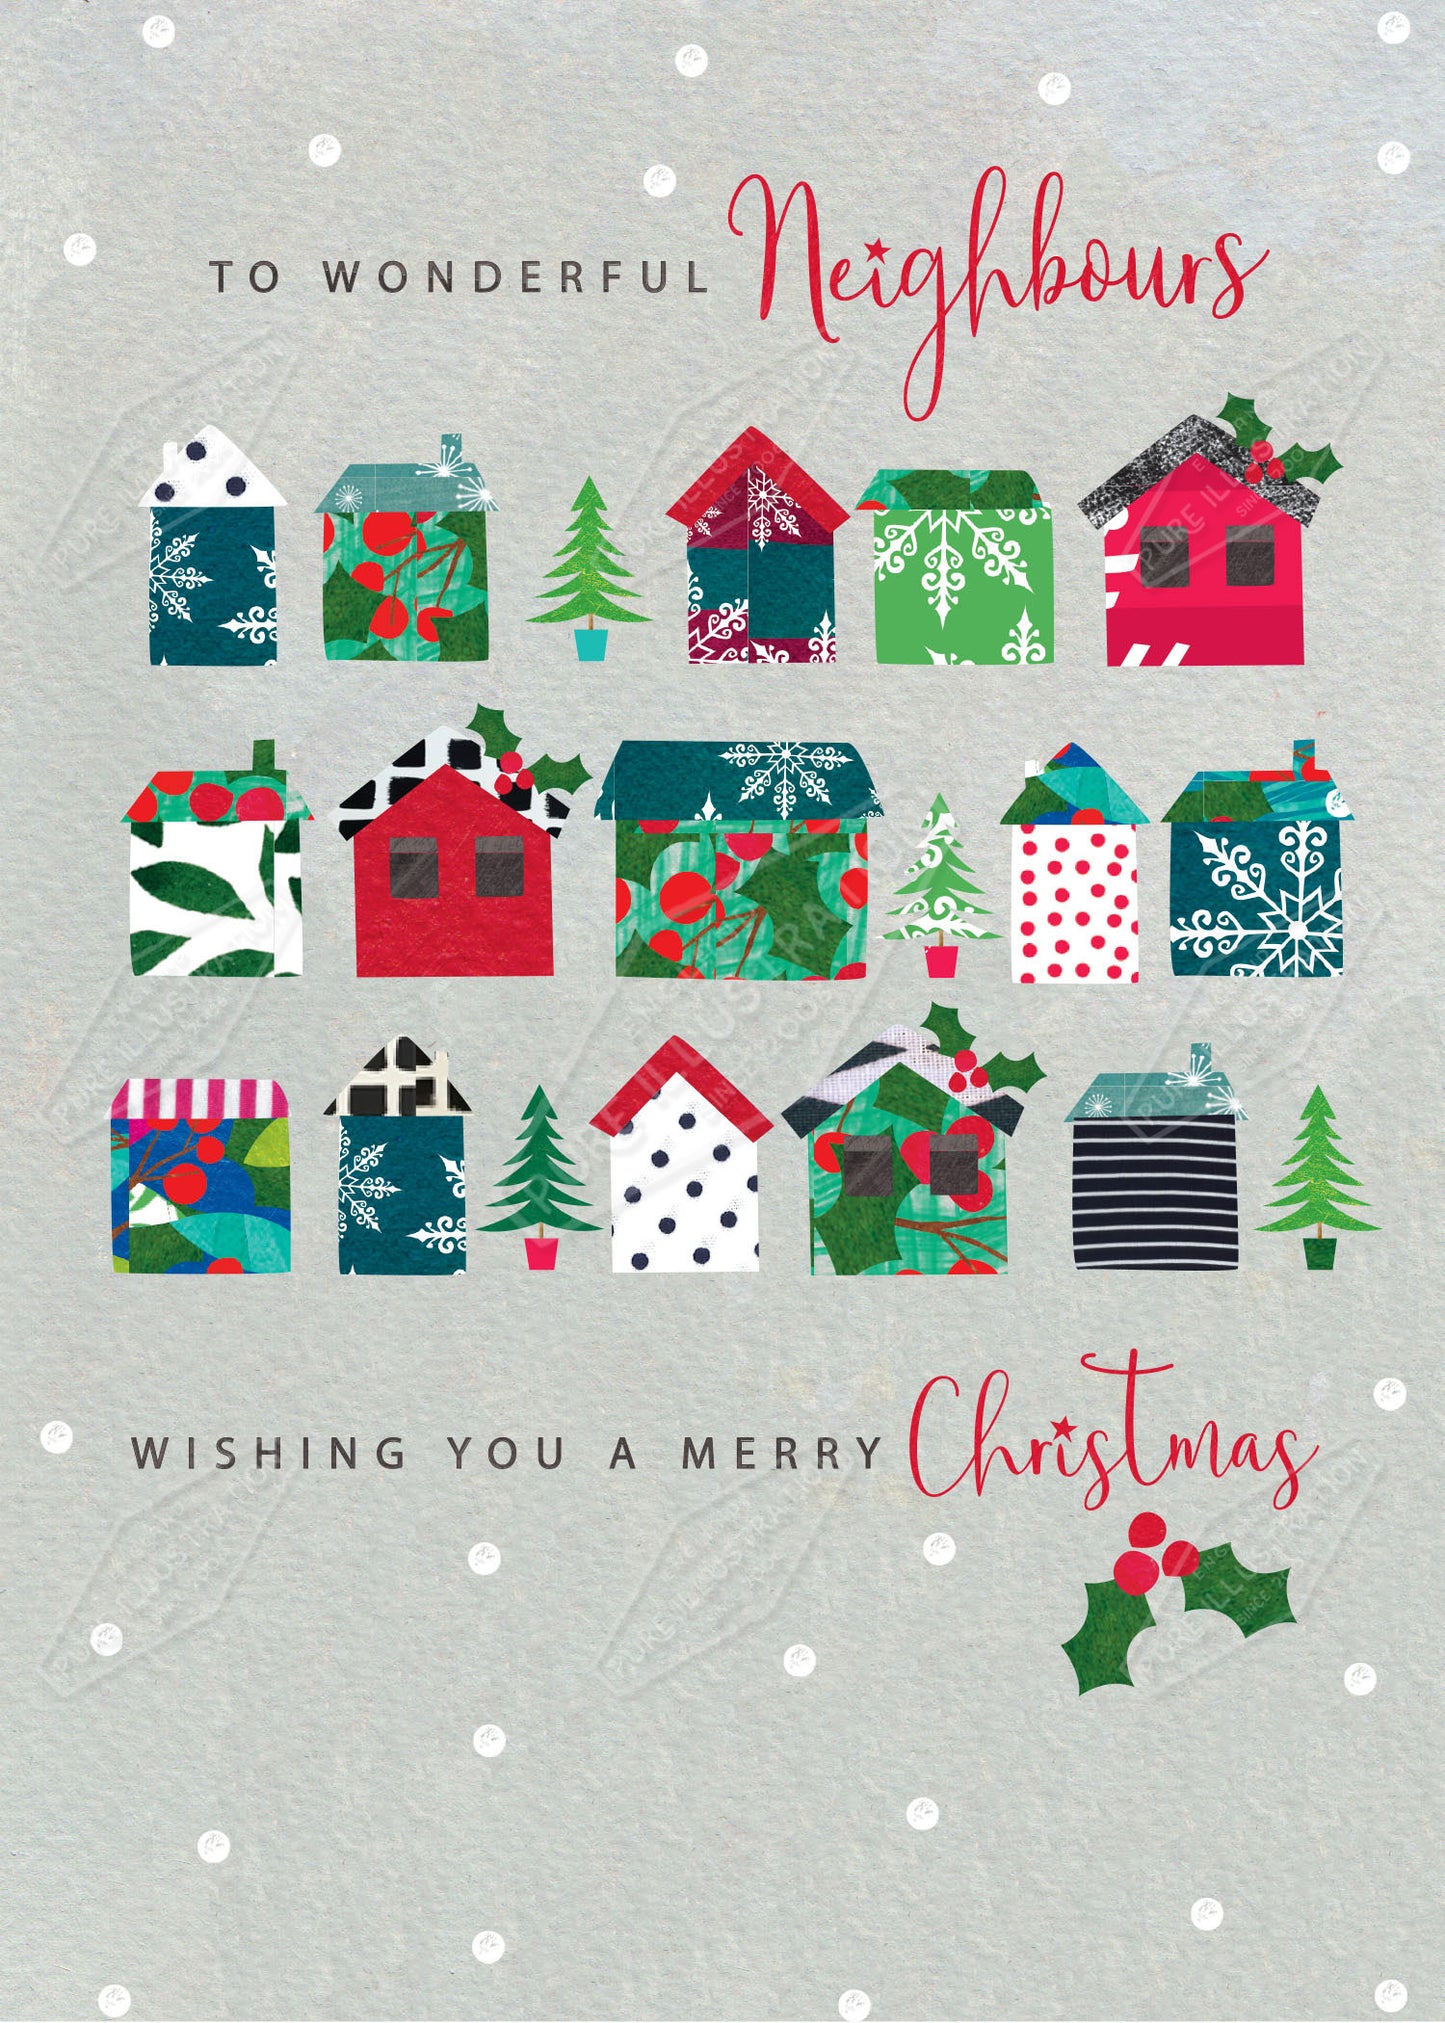 00035079IMC- Isla McDonald is represented by Pure Art Licensing Agency - Christmas Greeting Card Design